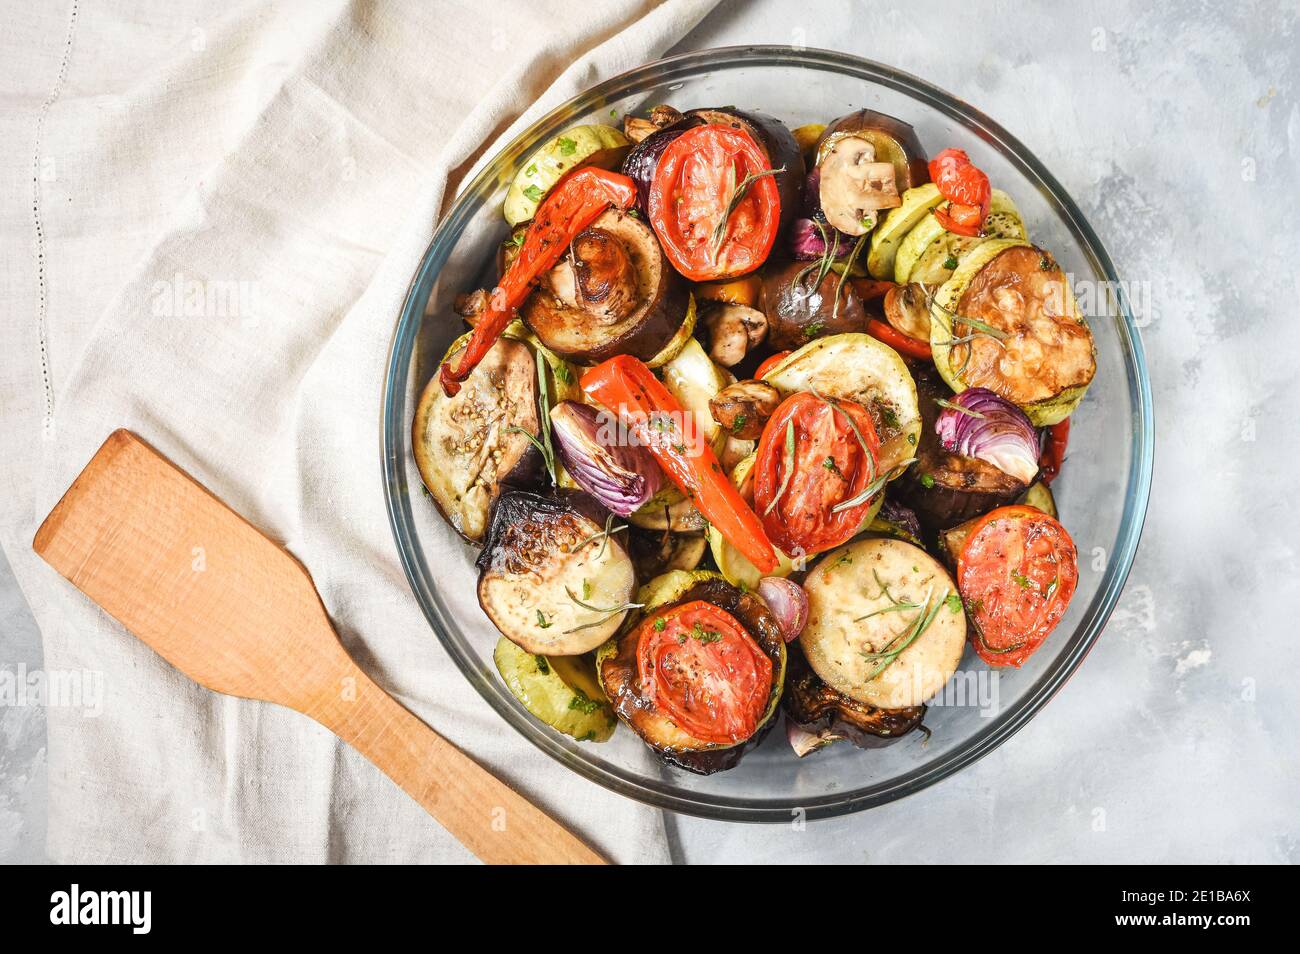 Roasted vegetables mix on plate on concrete background. Top view Stock Photo